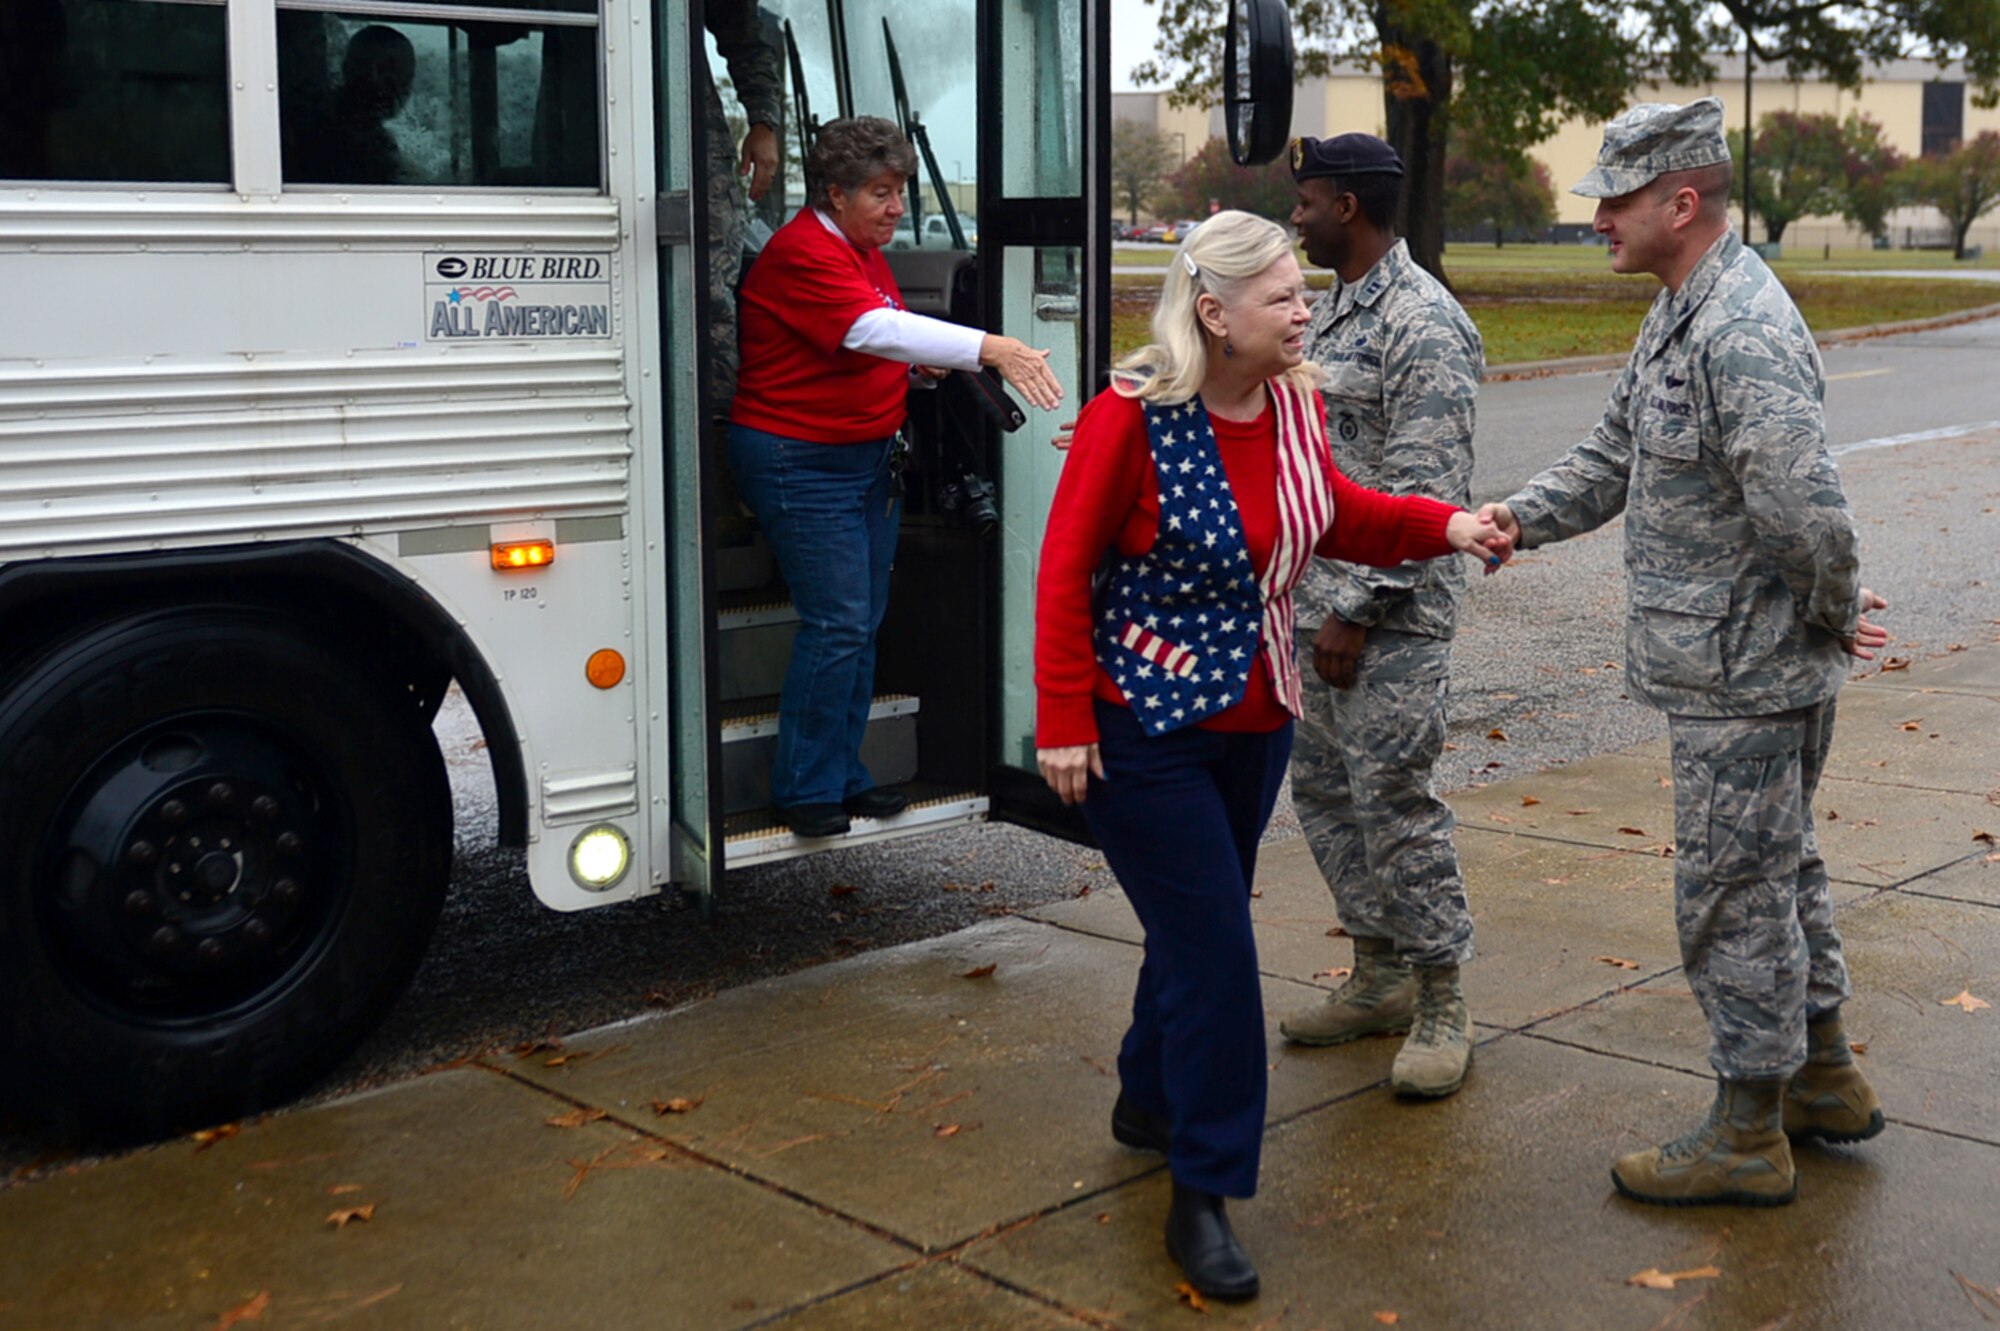 Members of the Quilts of Valor Foundation (QOVF) are greeted by 20th Fighter Wing (FW) leadership during a QOVF event at Shaw Air Force Base, South Carolina, Nov. 9, 2017.